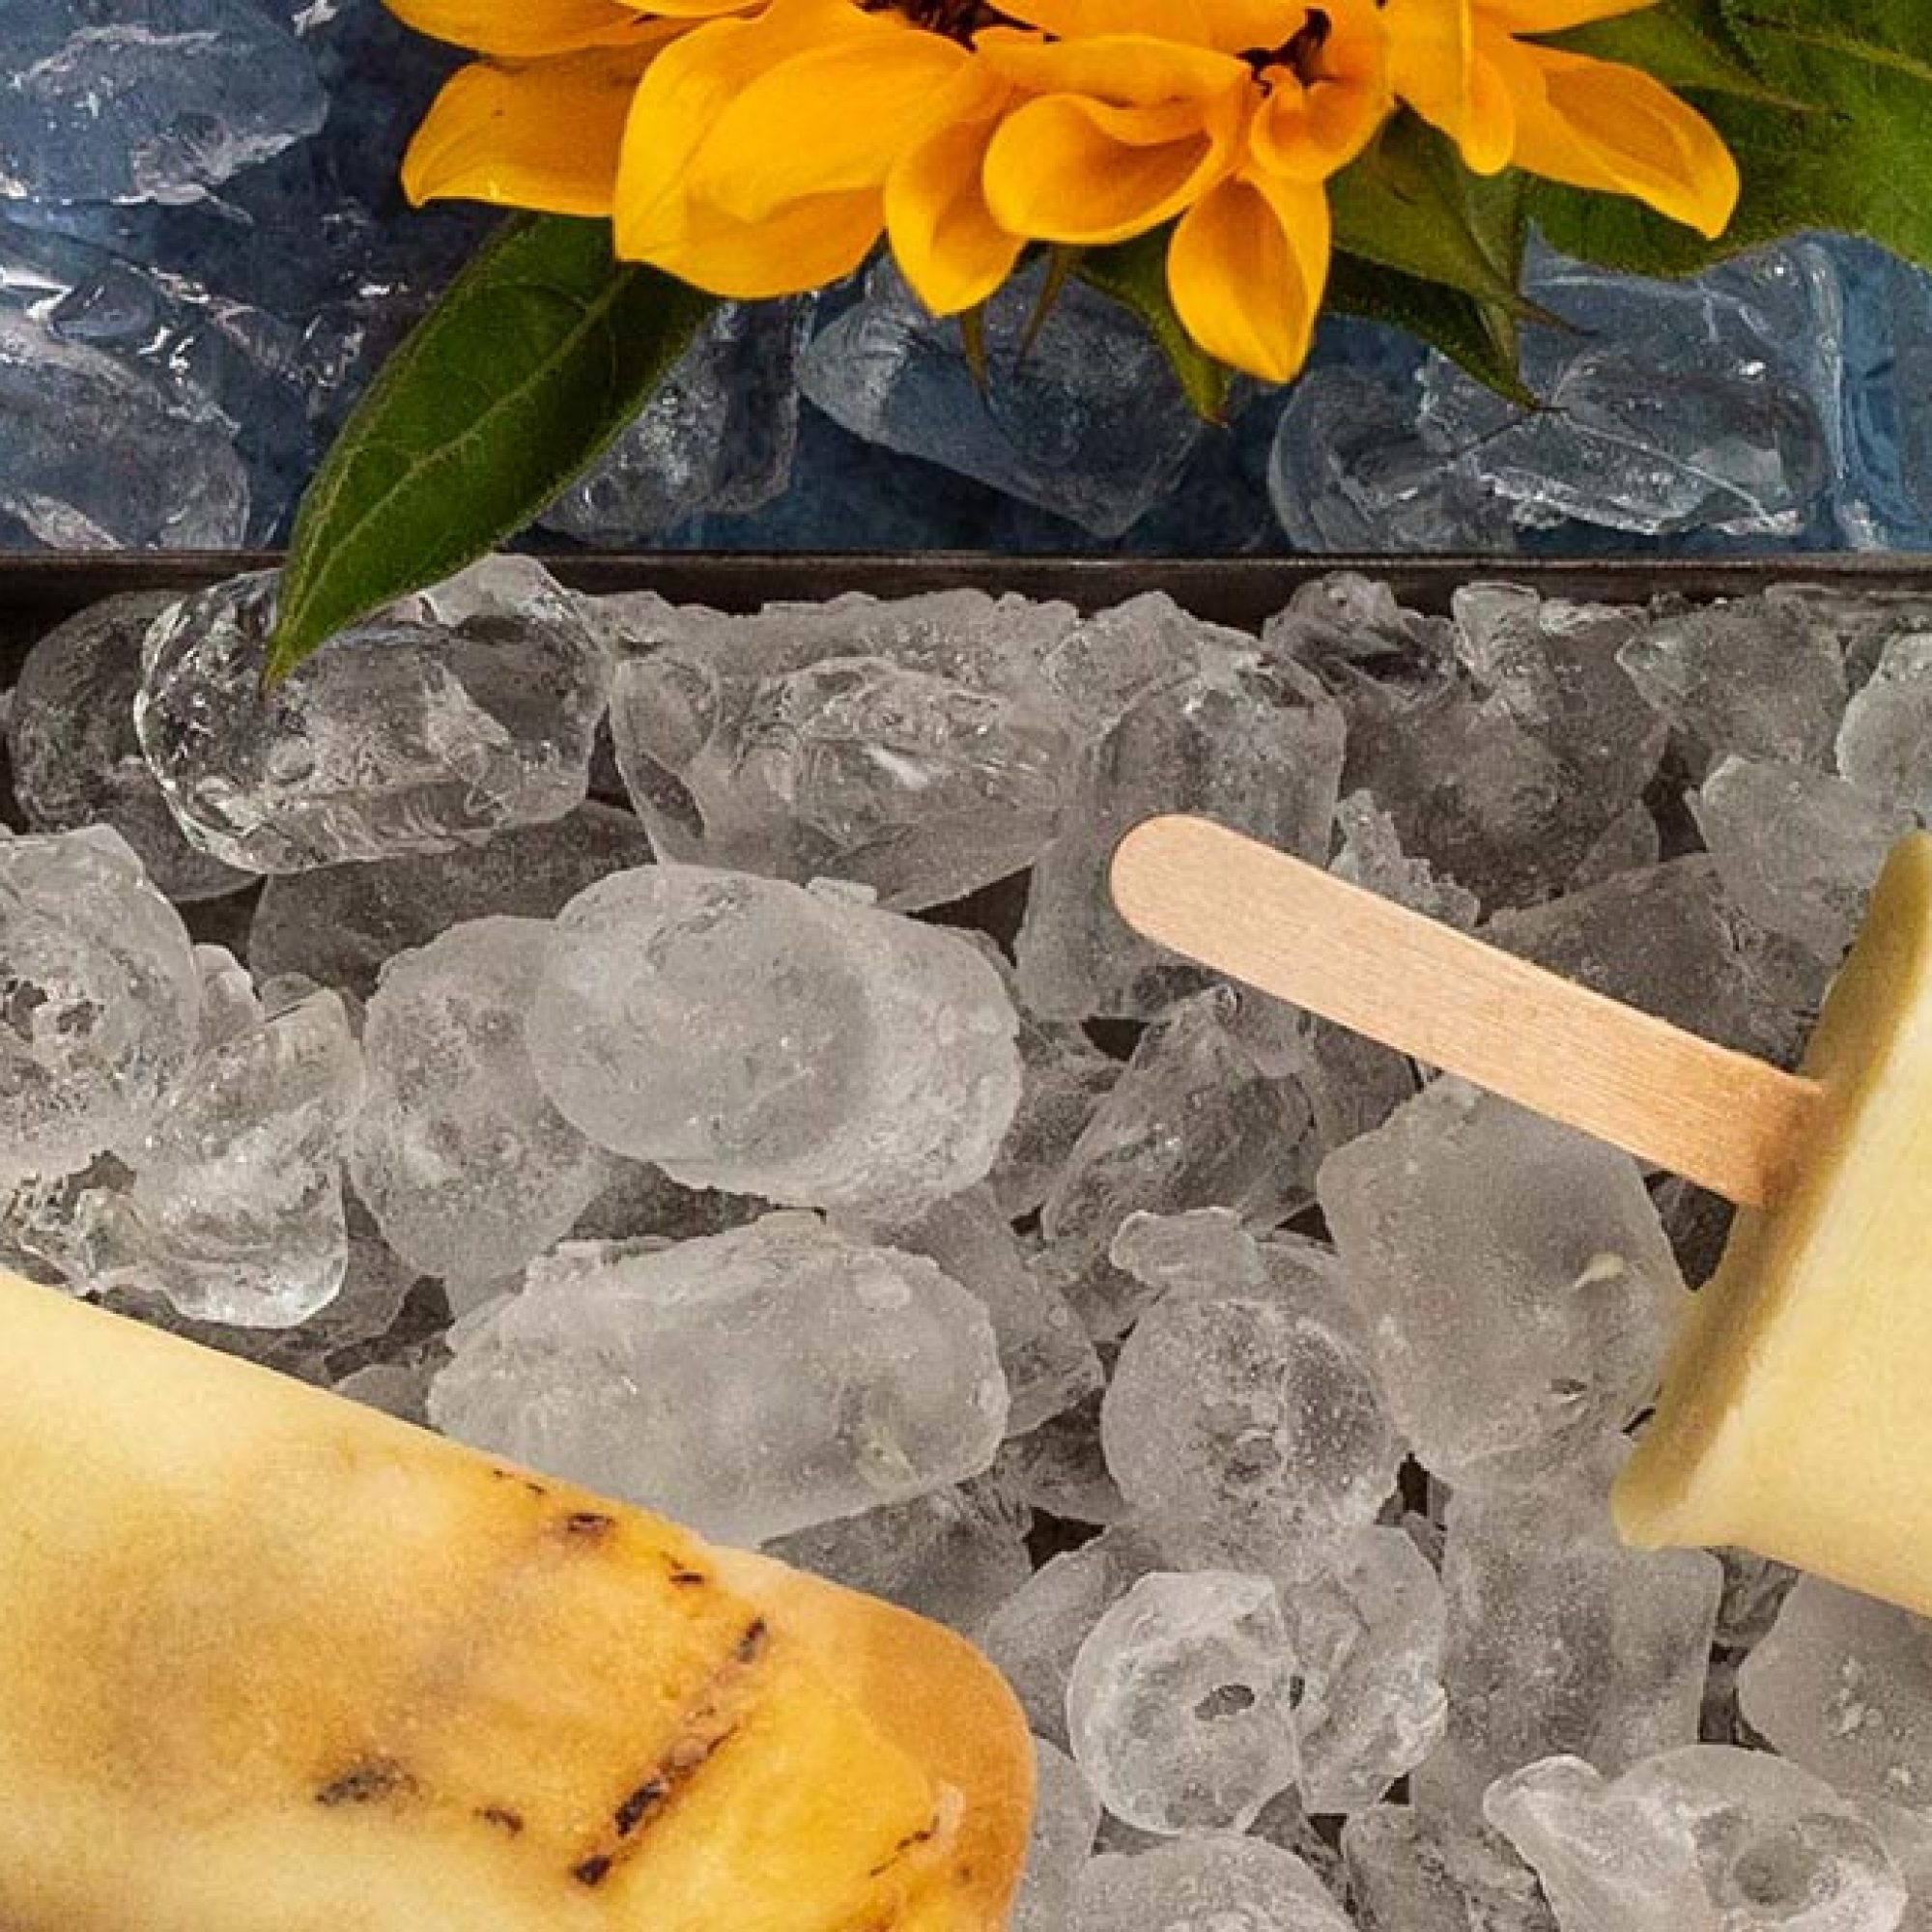 Grilled Pineapple & Coconut Popsicles